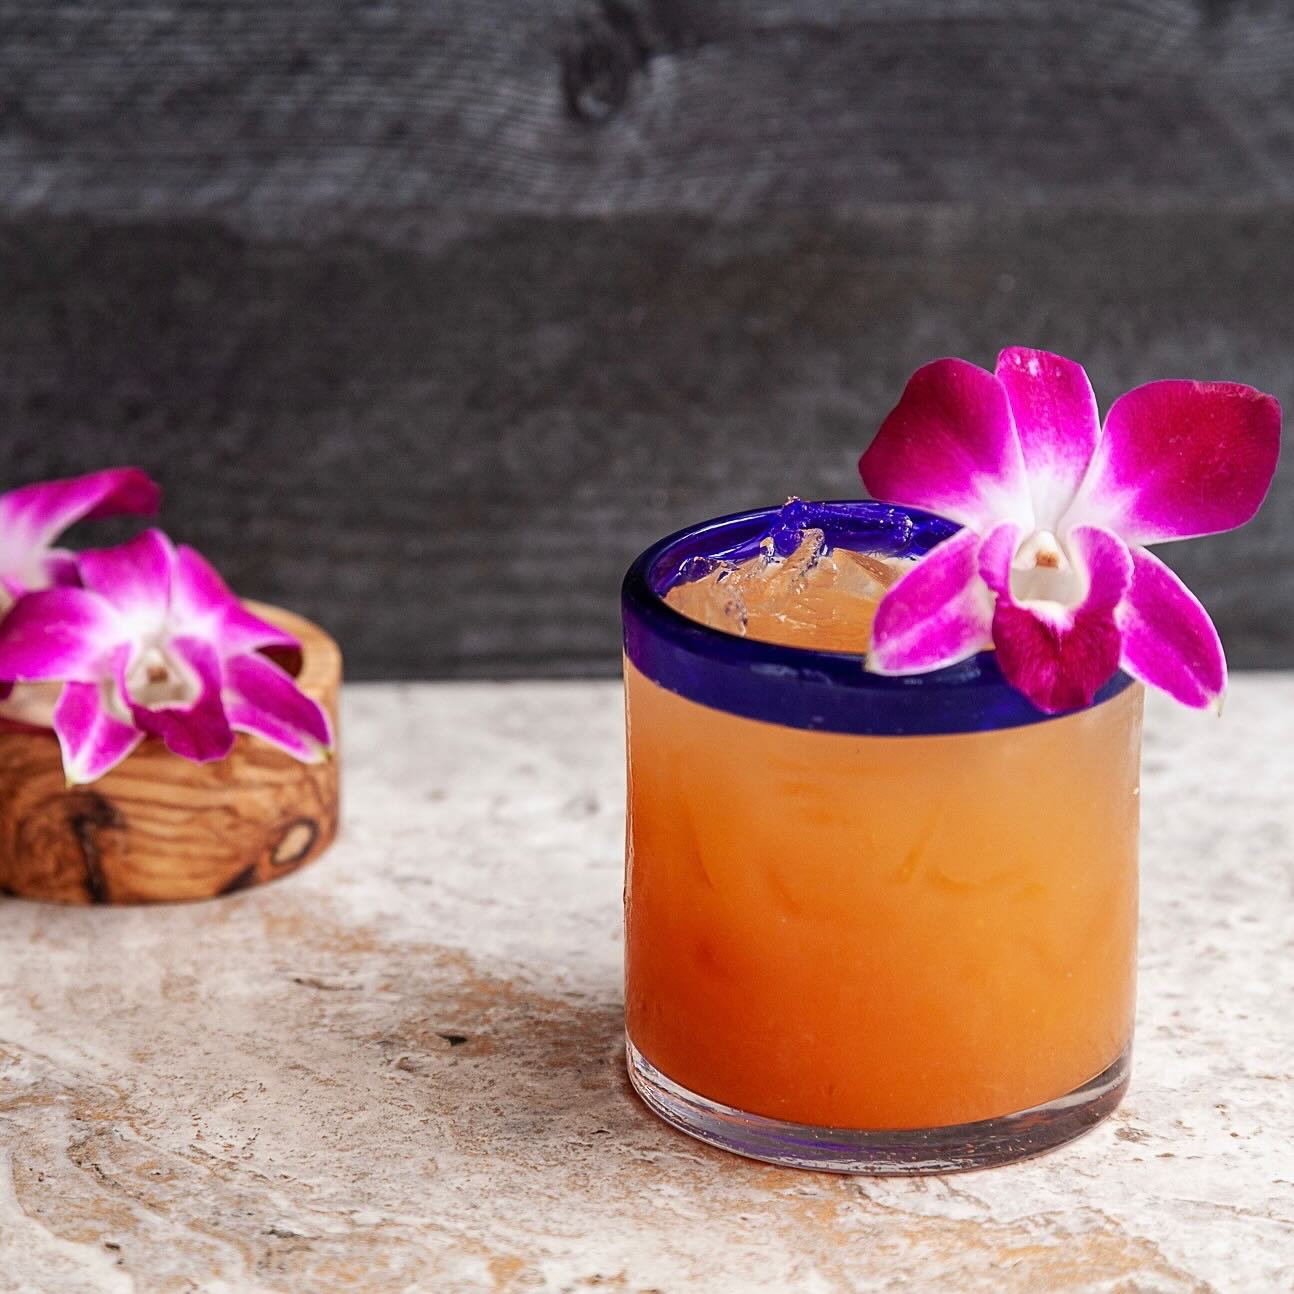 Transport your senses to a tropical oasis with our Passion Fruit Guava Margarita. A tantalizing fusion of flavors that combines the boldness of passion fruit with the sweet allure of guava. Pure cocktail paradise! To find your nearest location, visit